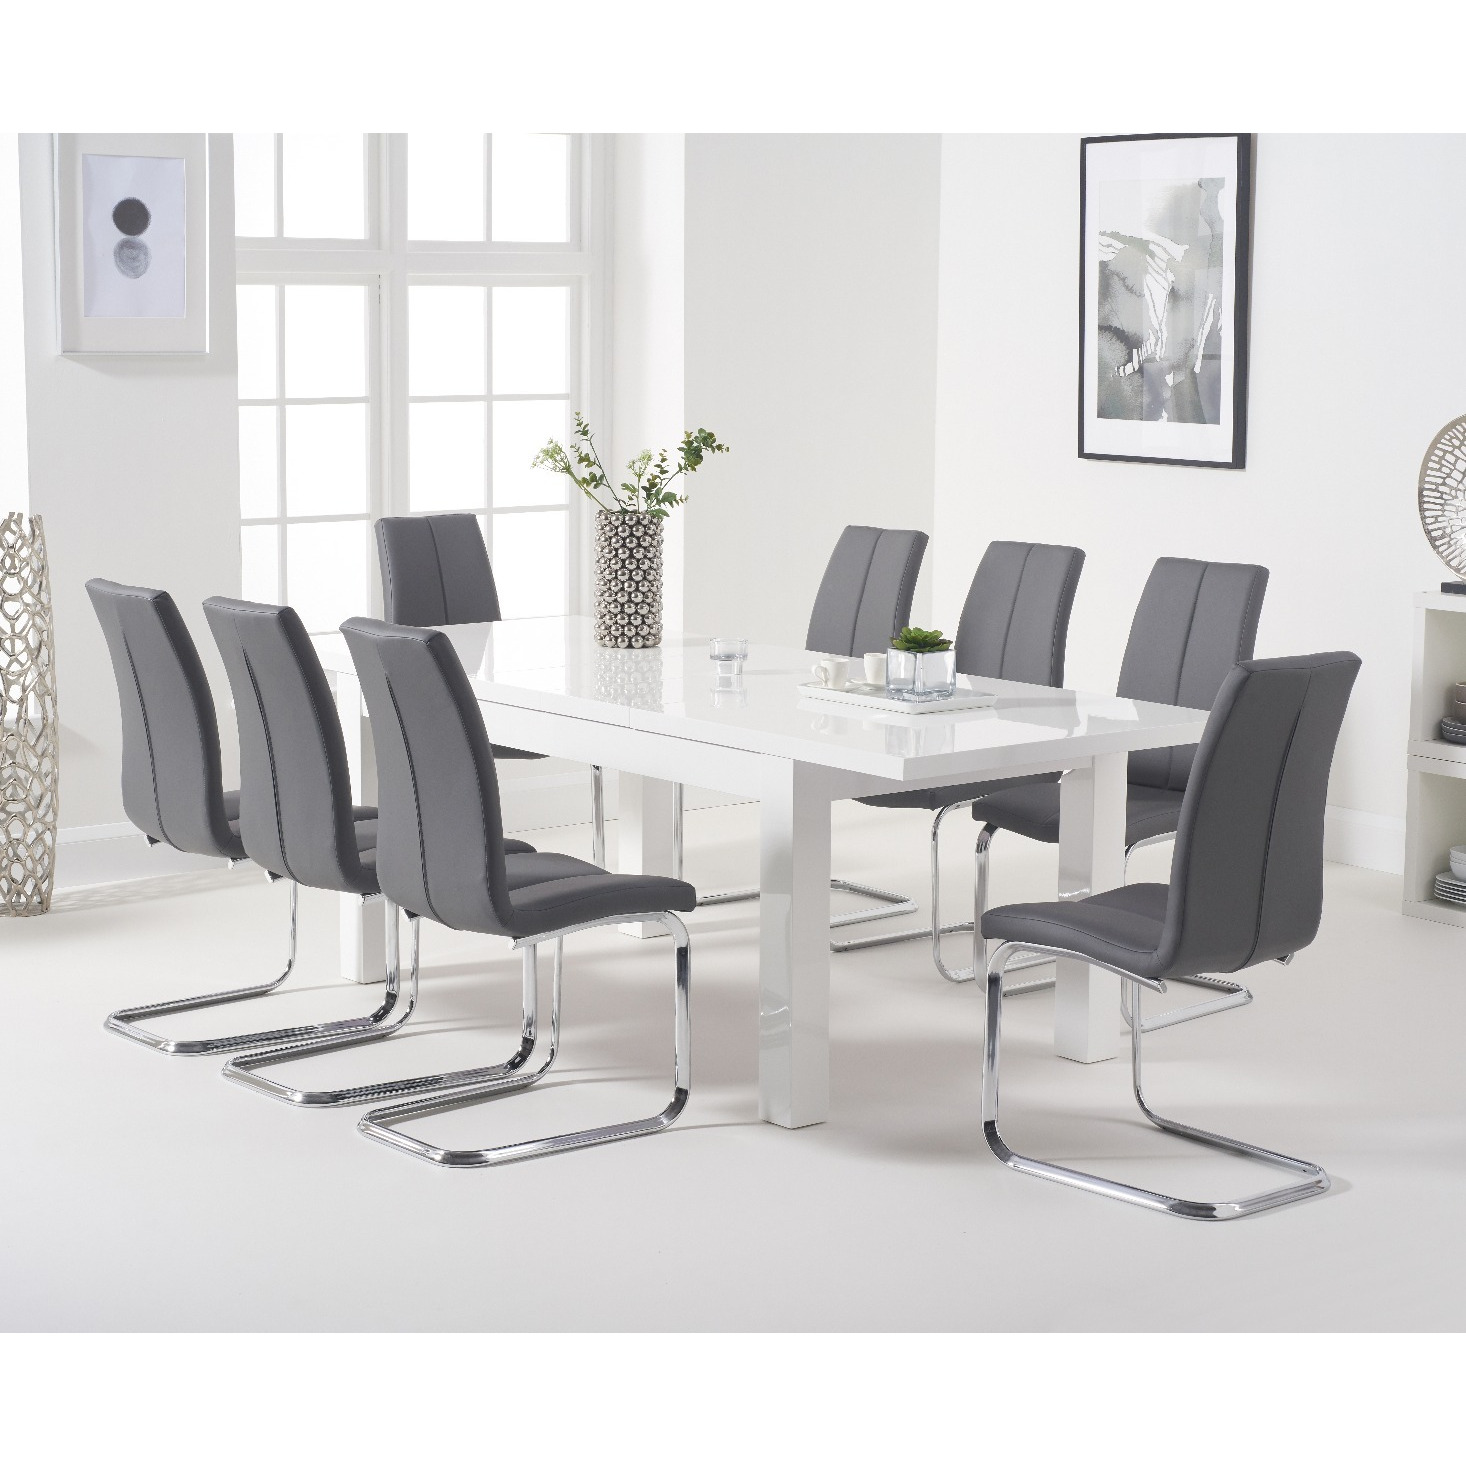 Atlanta White Gloss 160 220cm Extending Dining Table With 4 Grey Gianni Chairs 60854254 ?w=1080